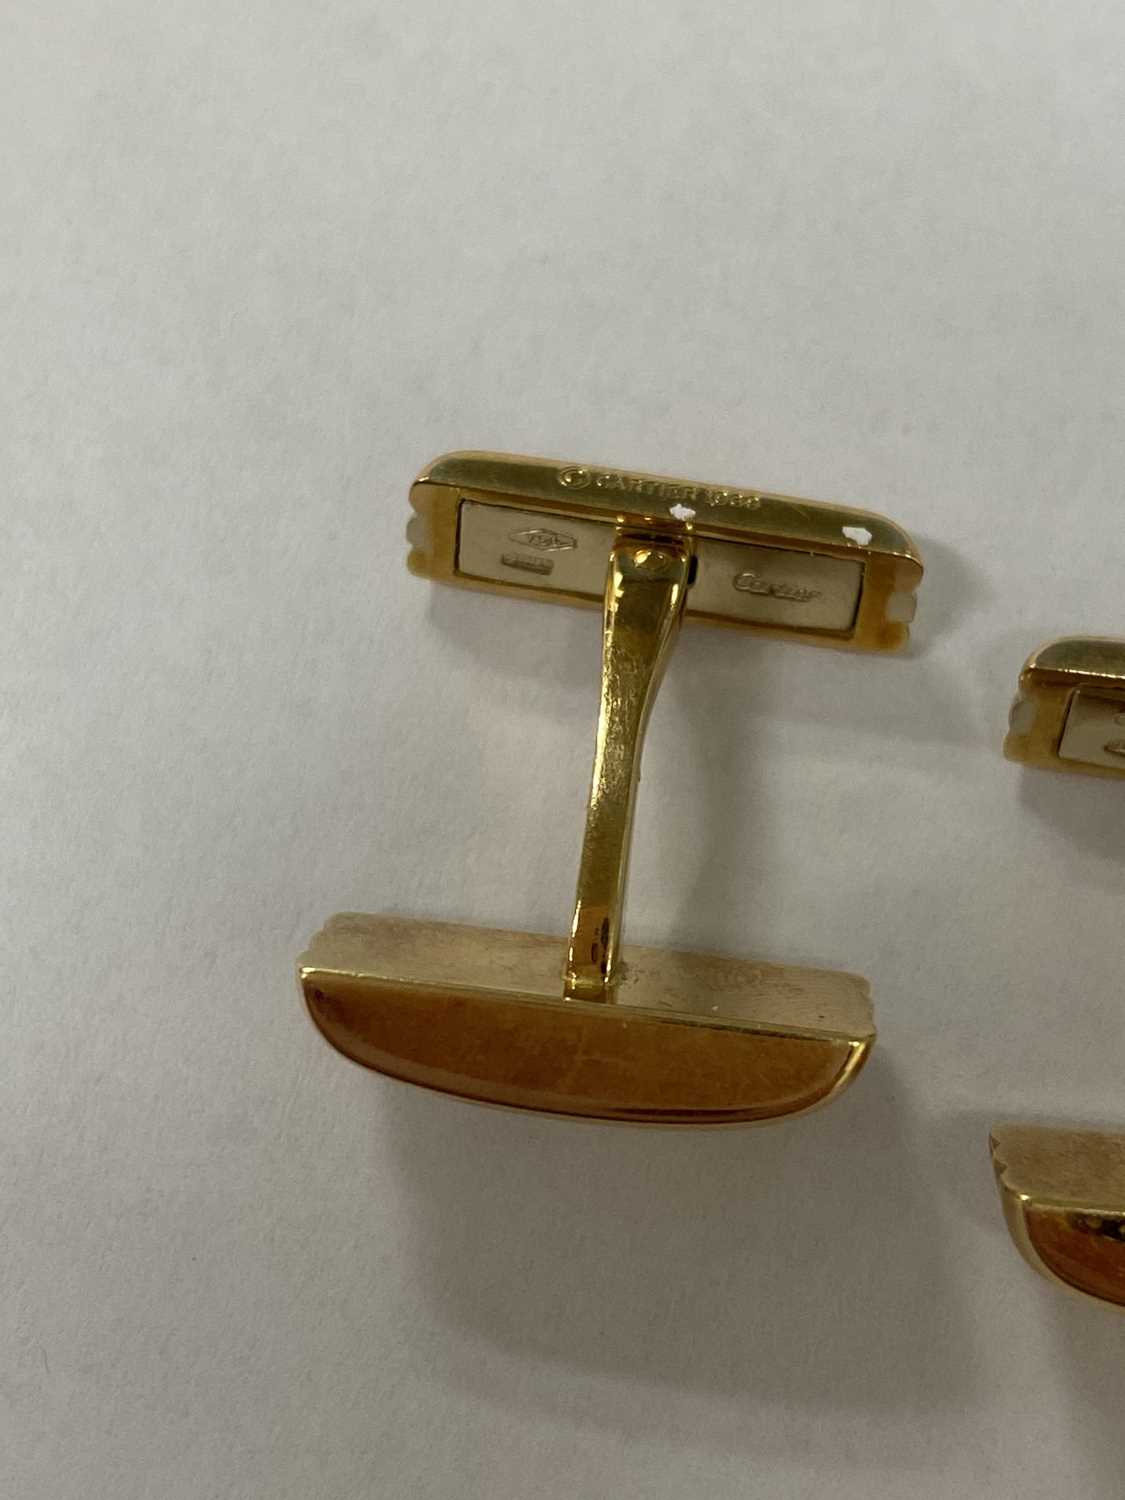 A pair of Cartier 18ct tri-coloured gold cufflinks - Image 2 of 9